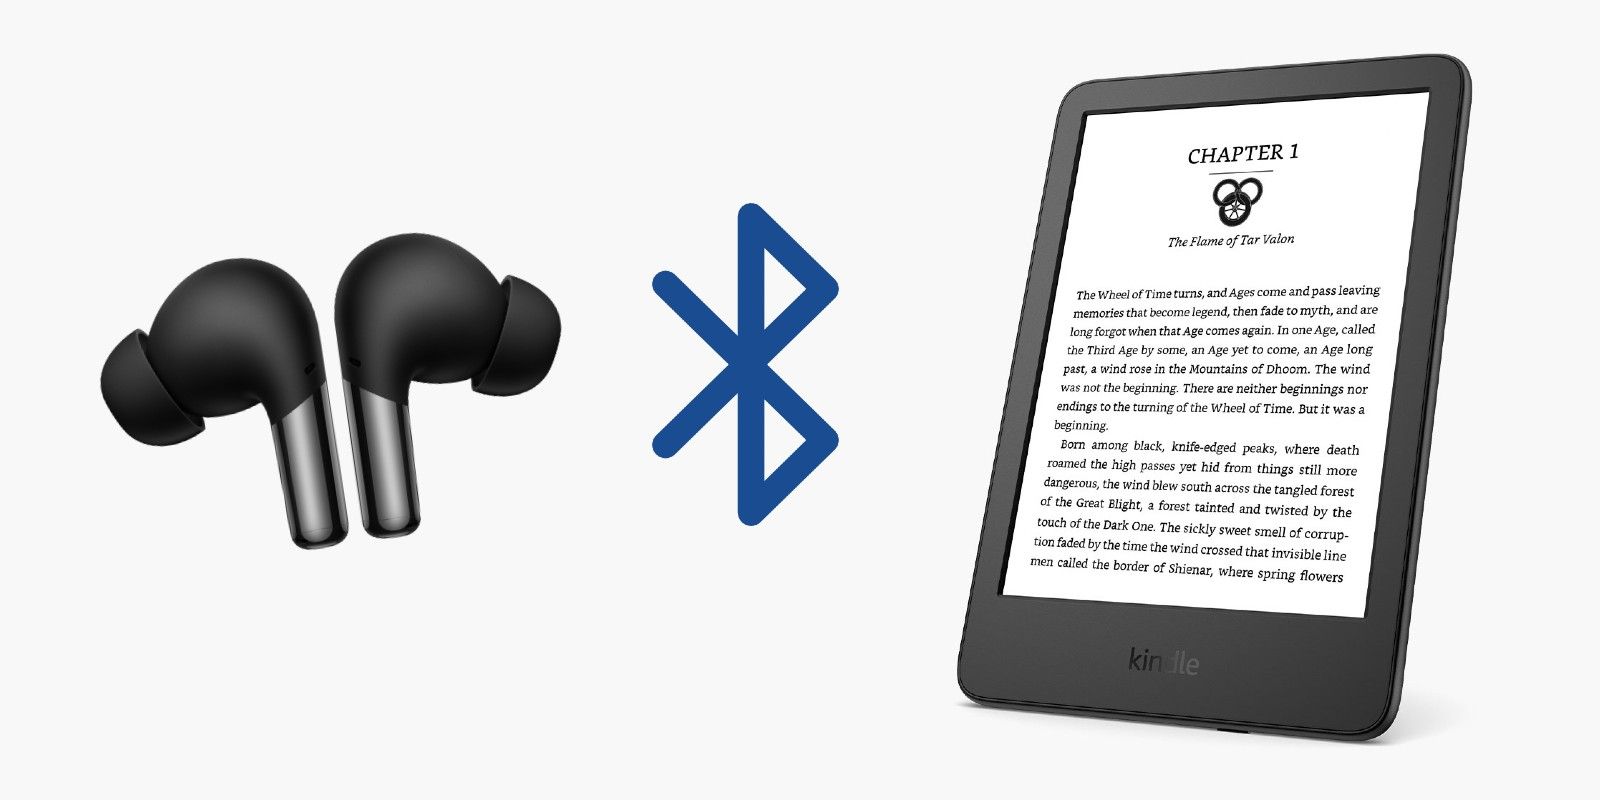 An image showing a pair of wireless earbuds, the Bluetooth symbol, and a Kindle reader.